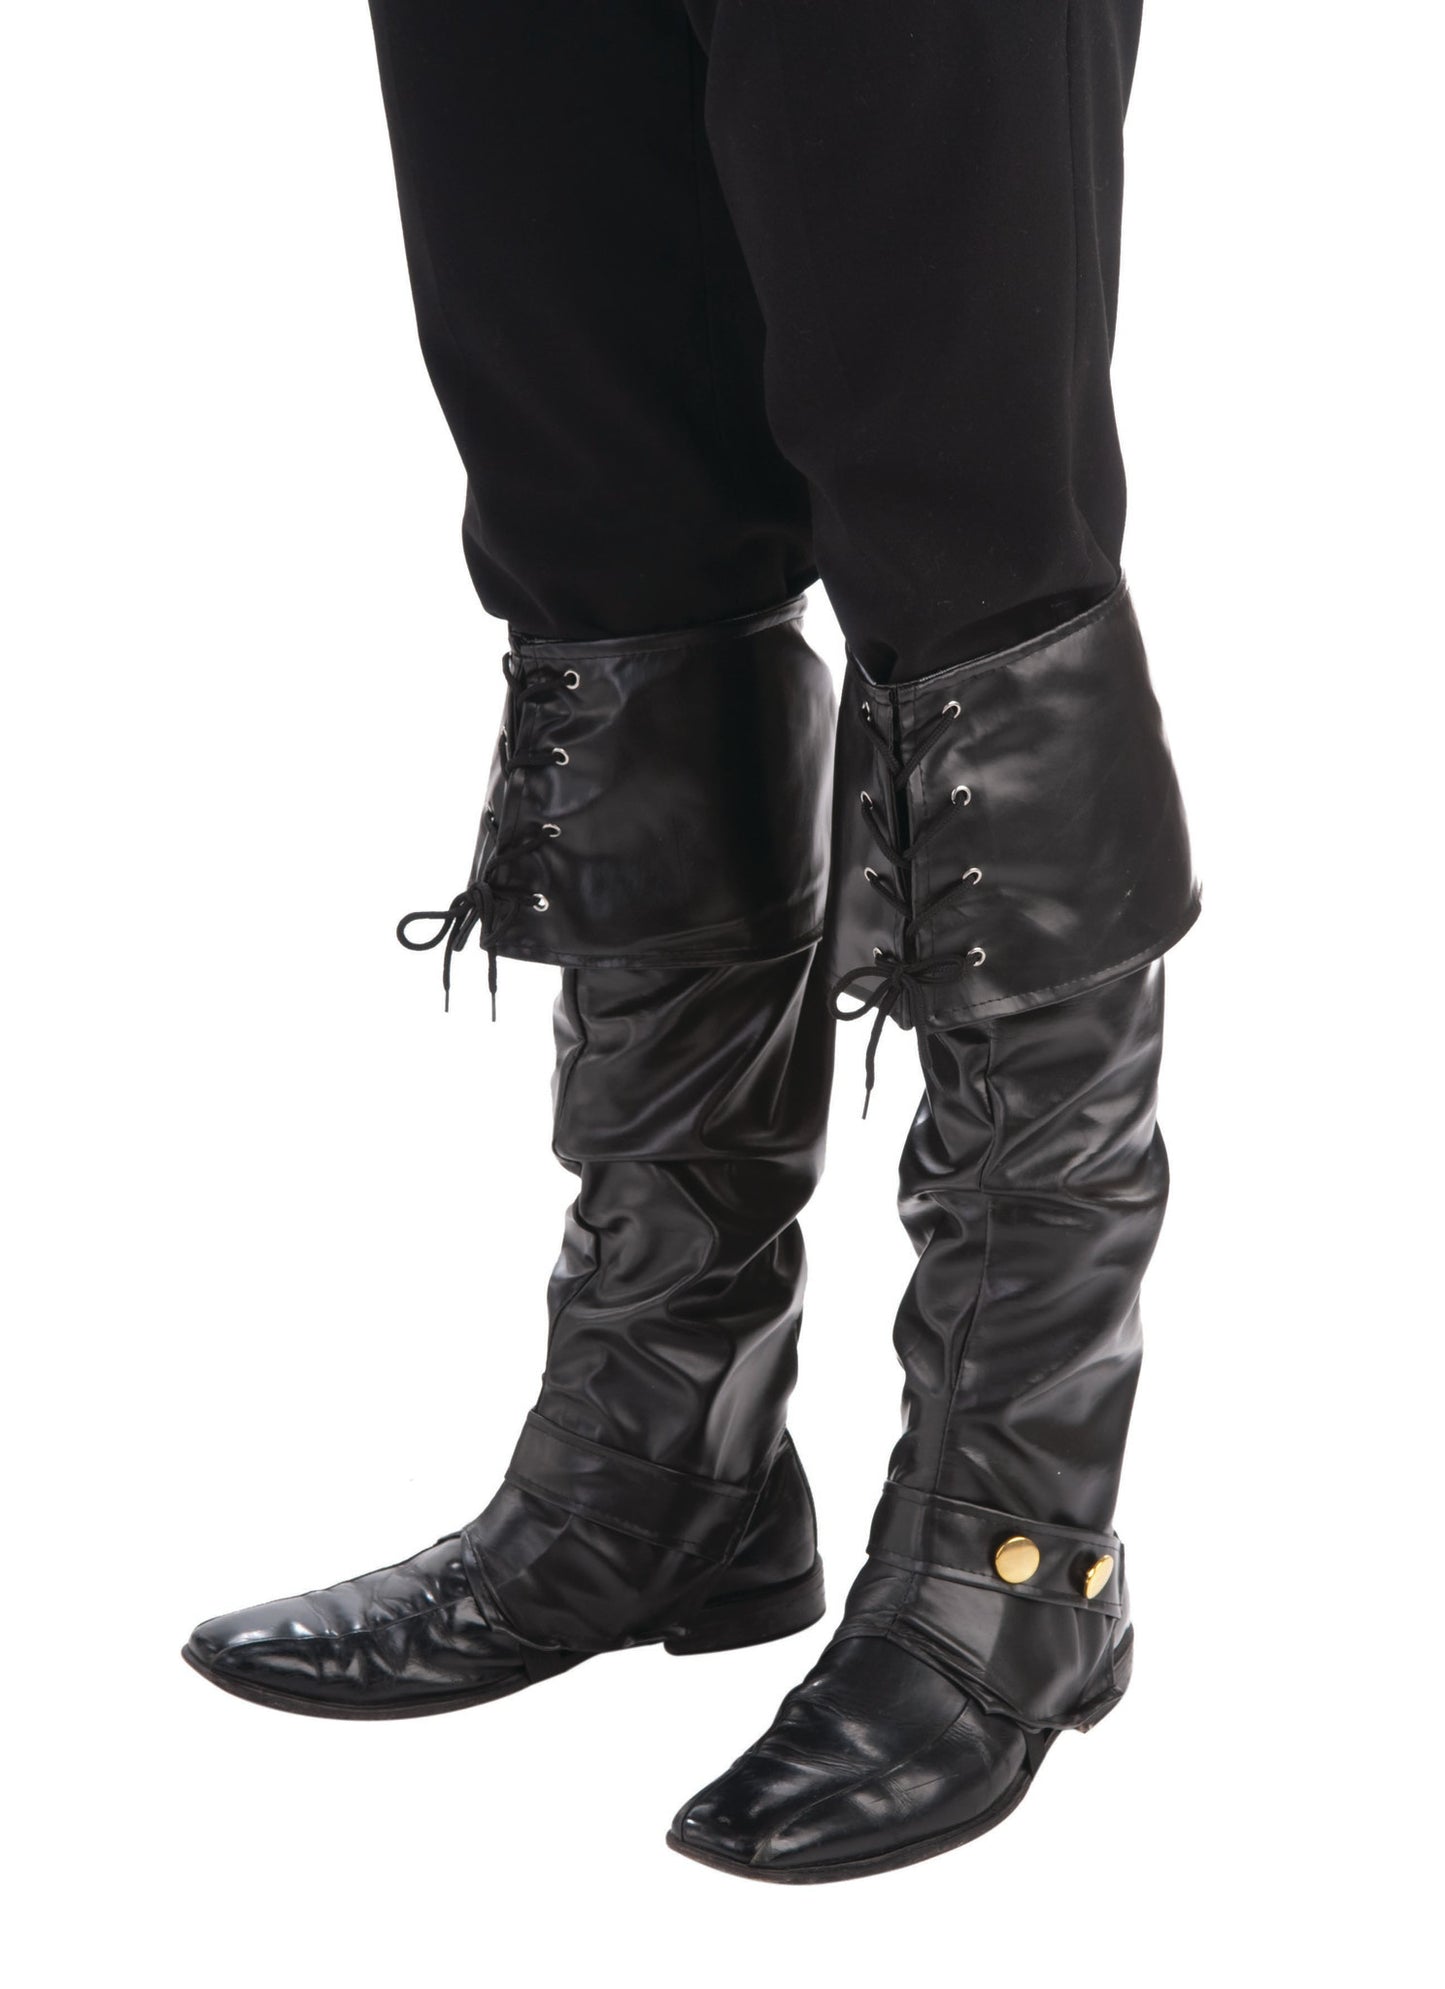 Deluxe Pirate Boot Covers